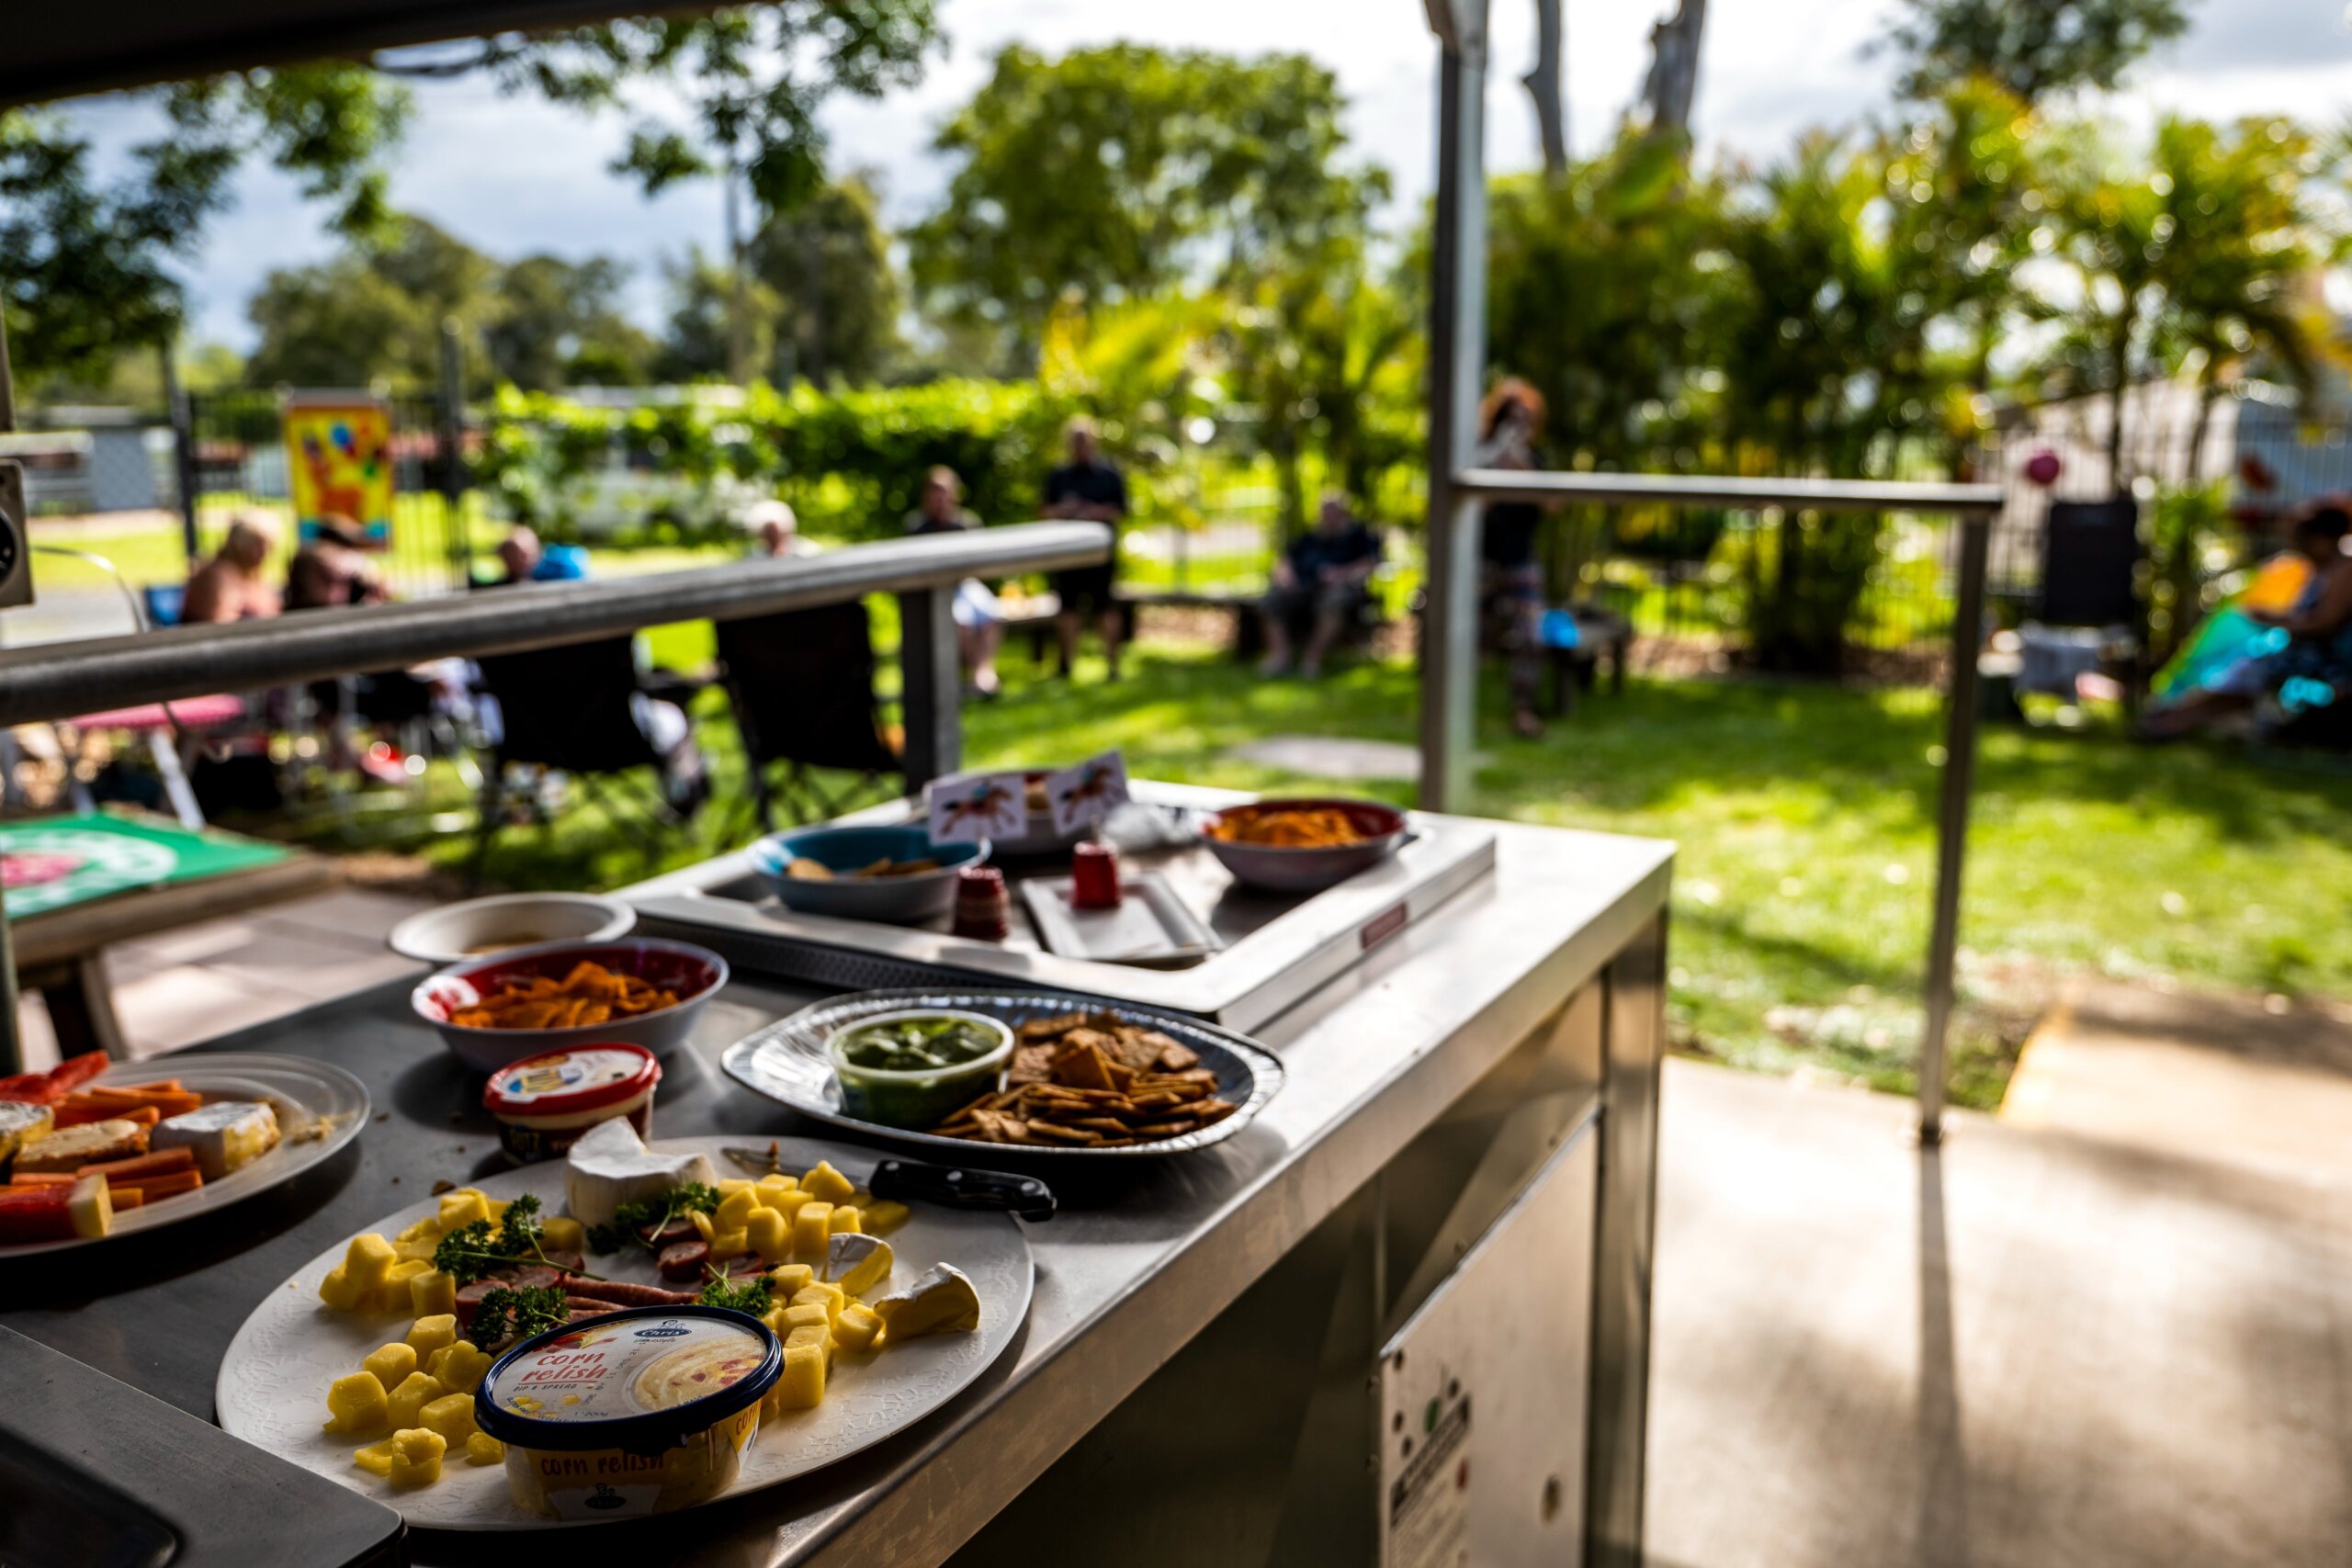 Our camp kitchen dining areas hosting an event, with food platters and our park guests chatting.